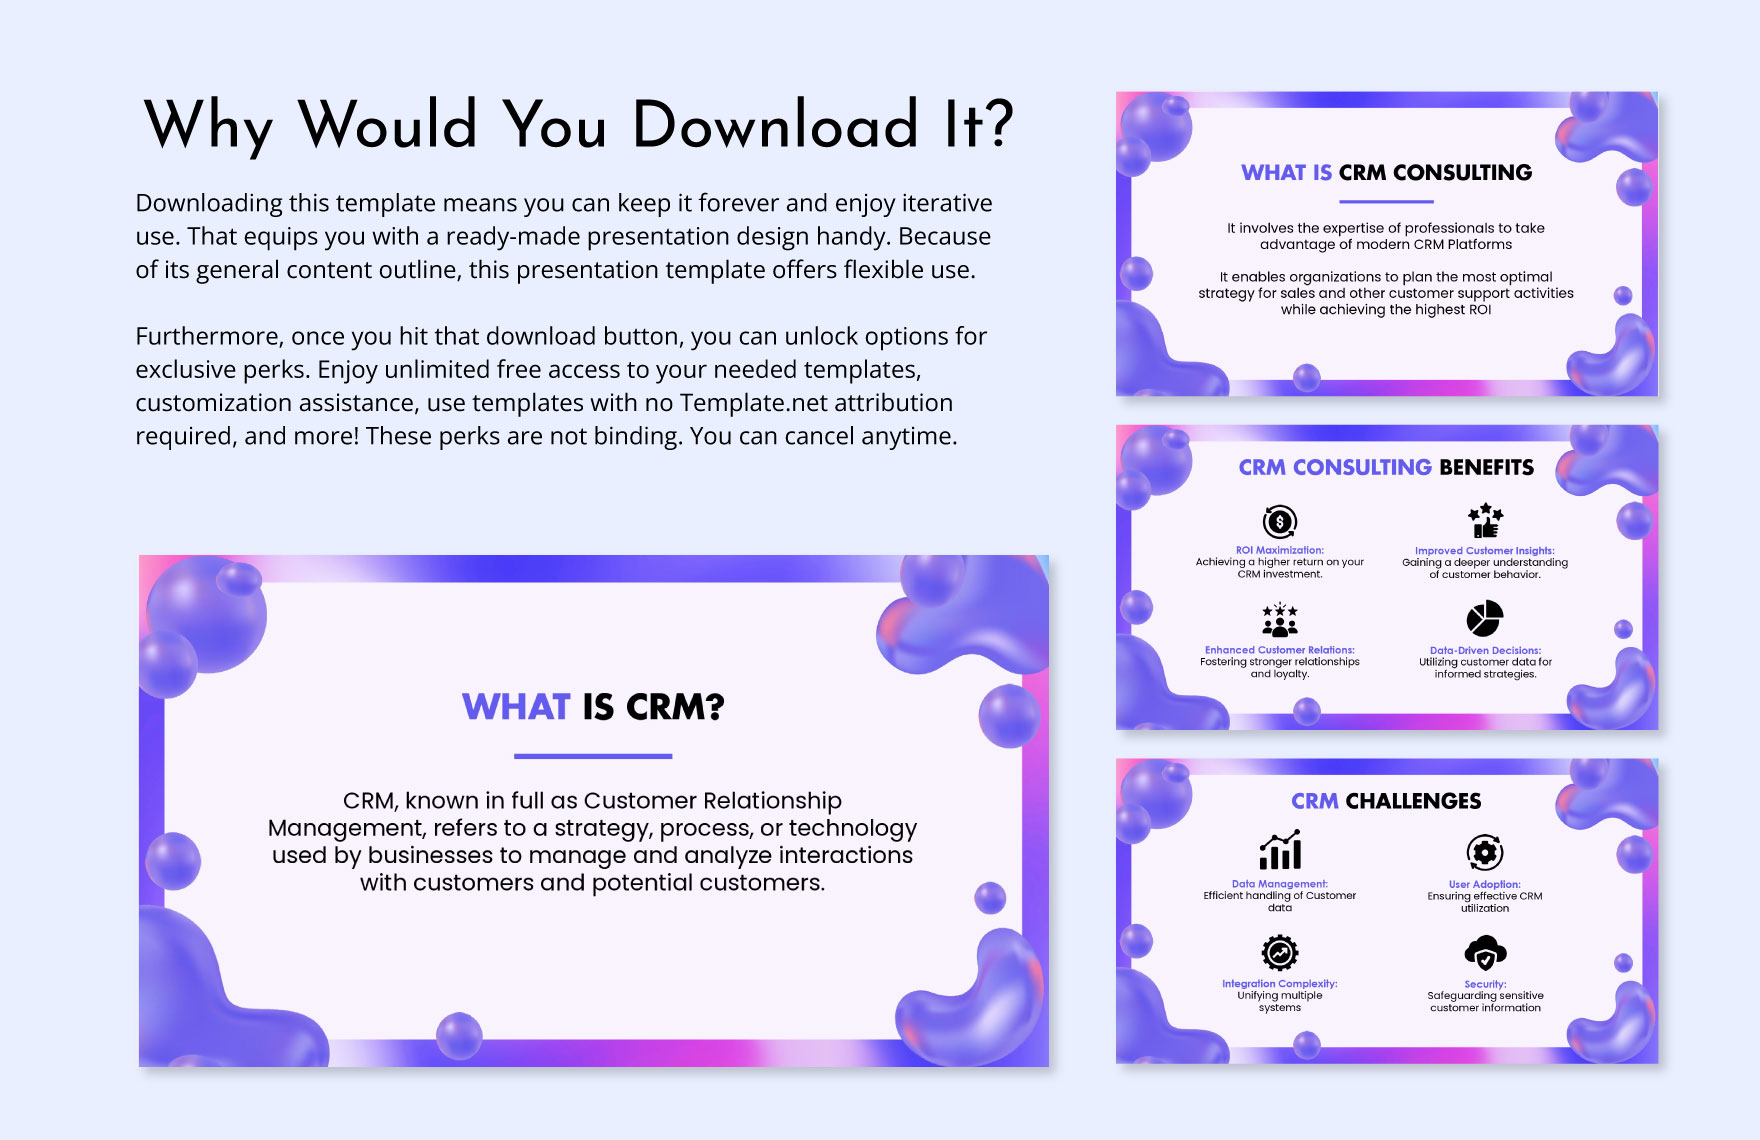 IT CRM Consulting Business Presentation Template